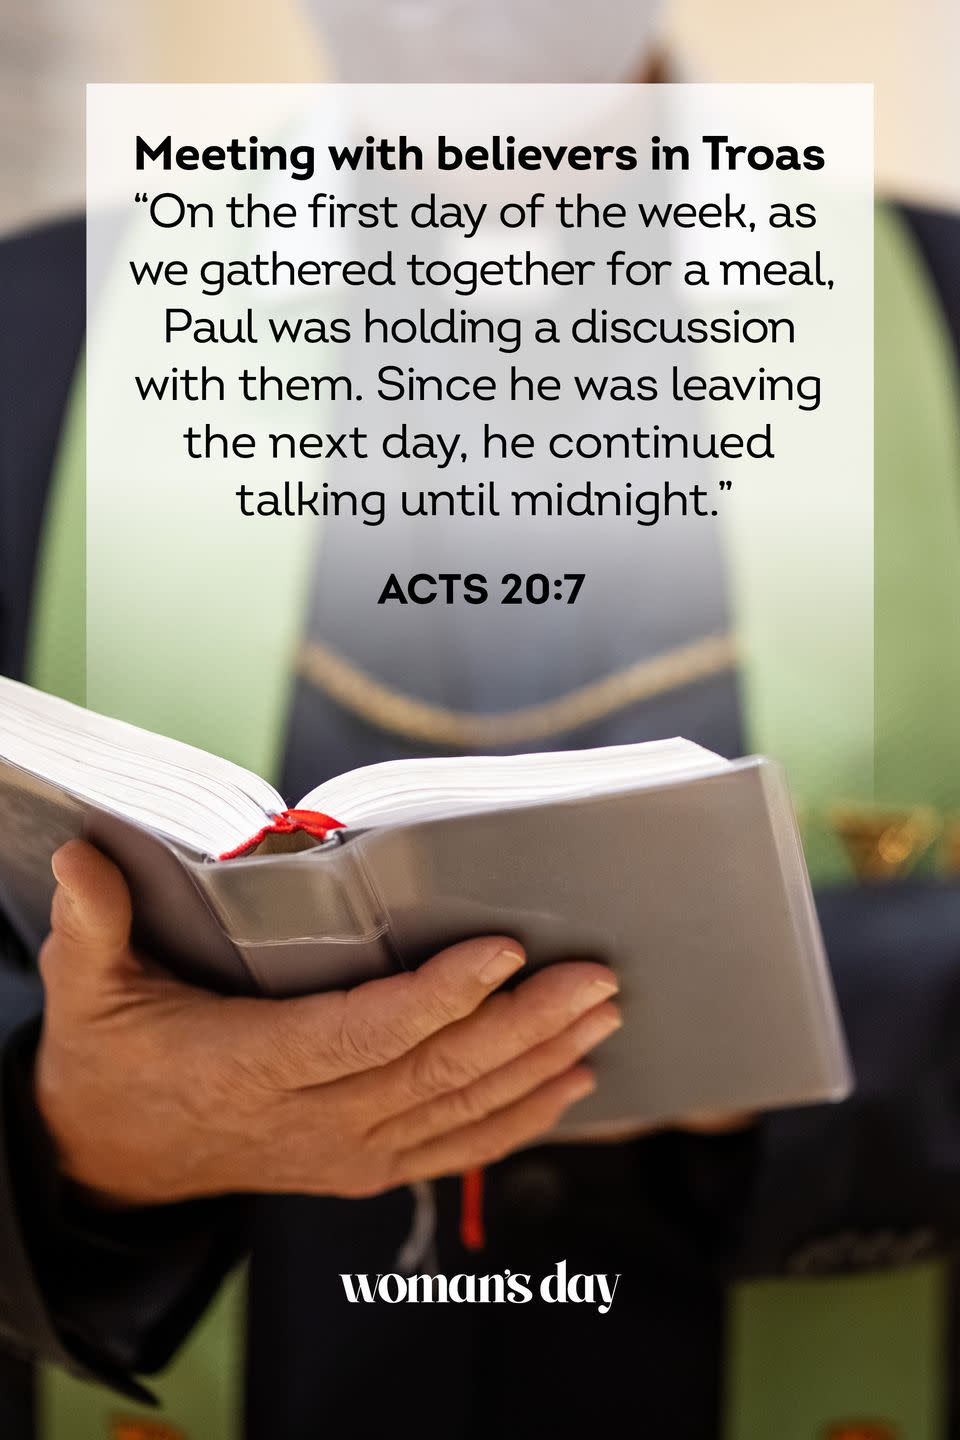 9) Acts 20:7